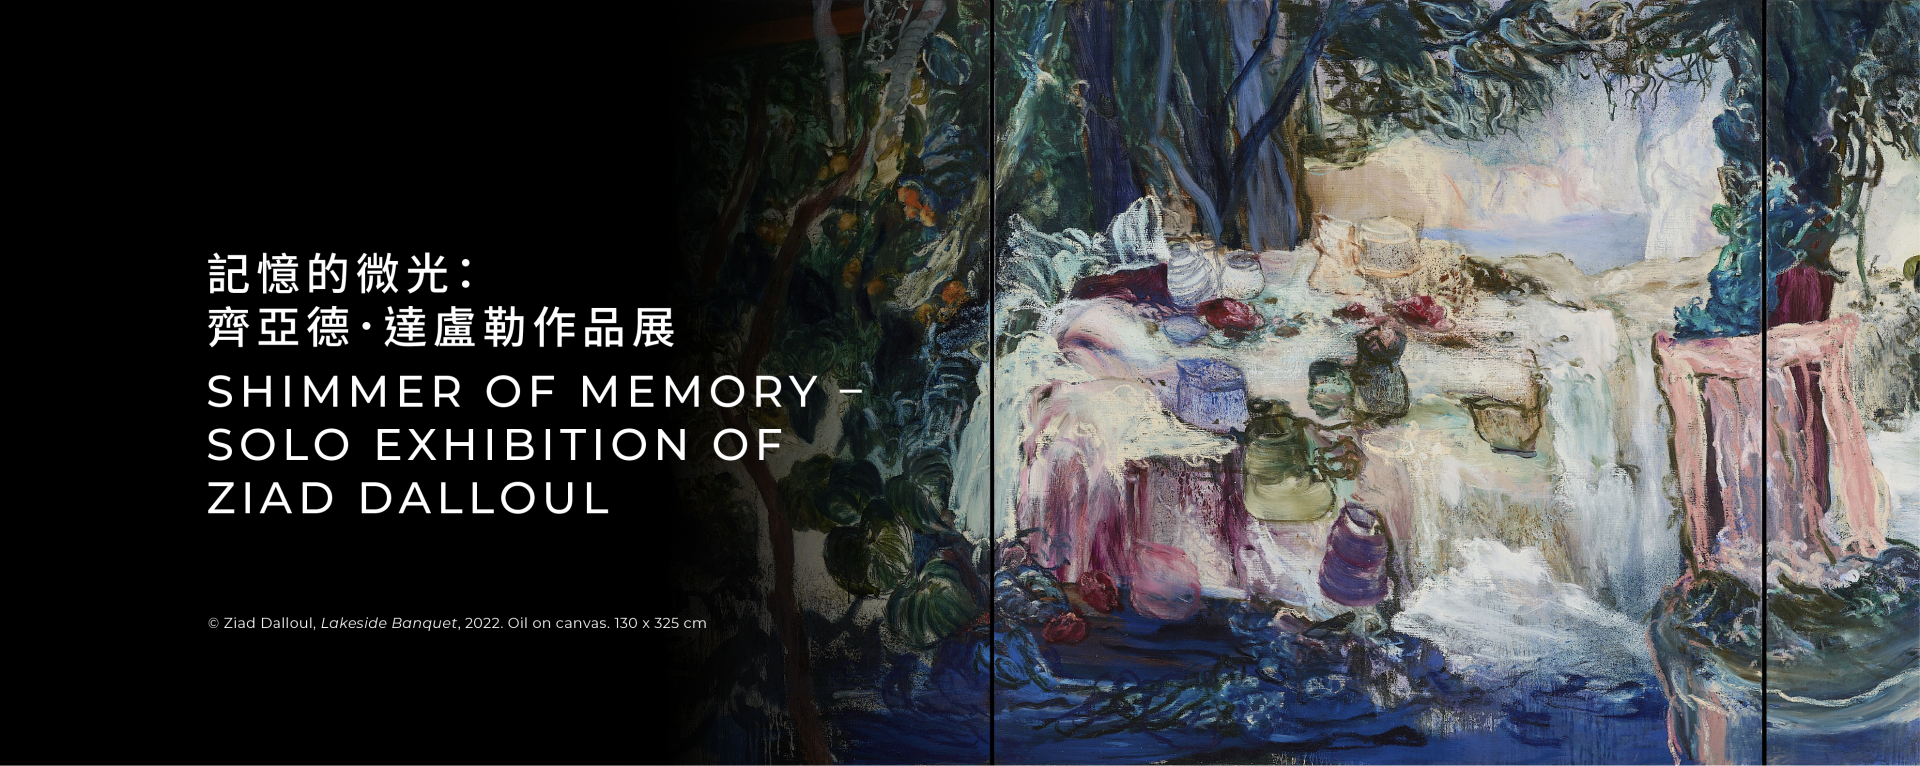 Shimmer of Memory – Solo Exhibition of Ziad Dalloul